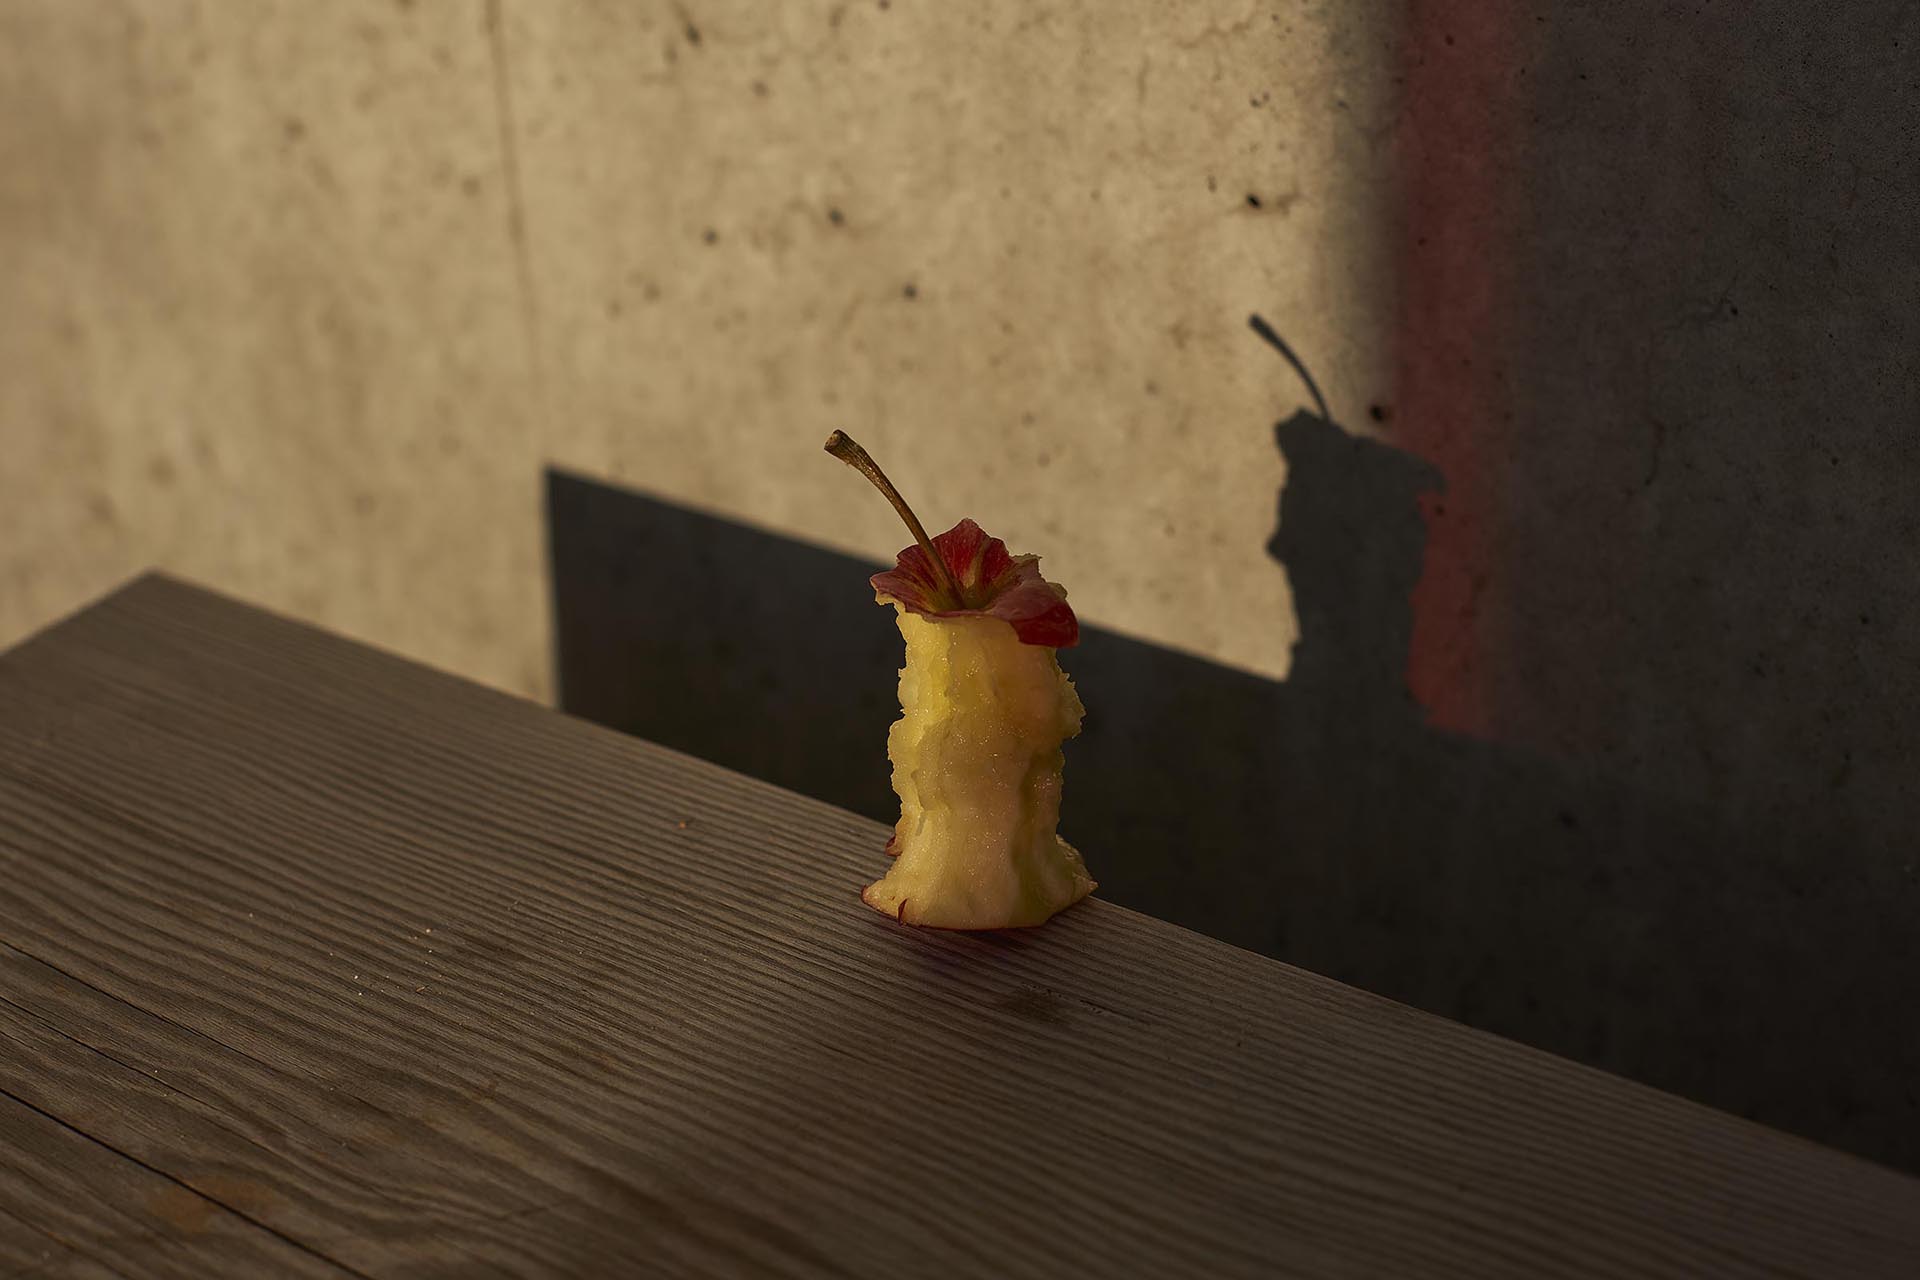 Random objects and places. Apple core left in the light of an art installation.